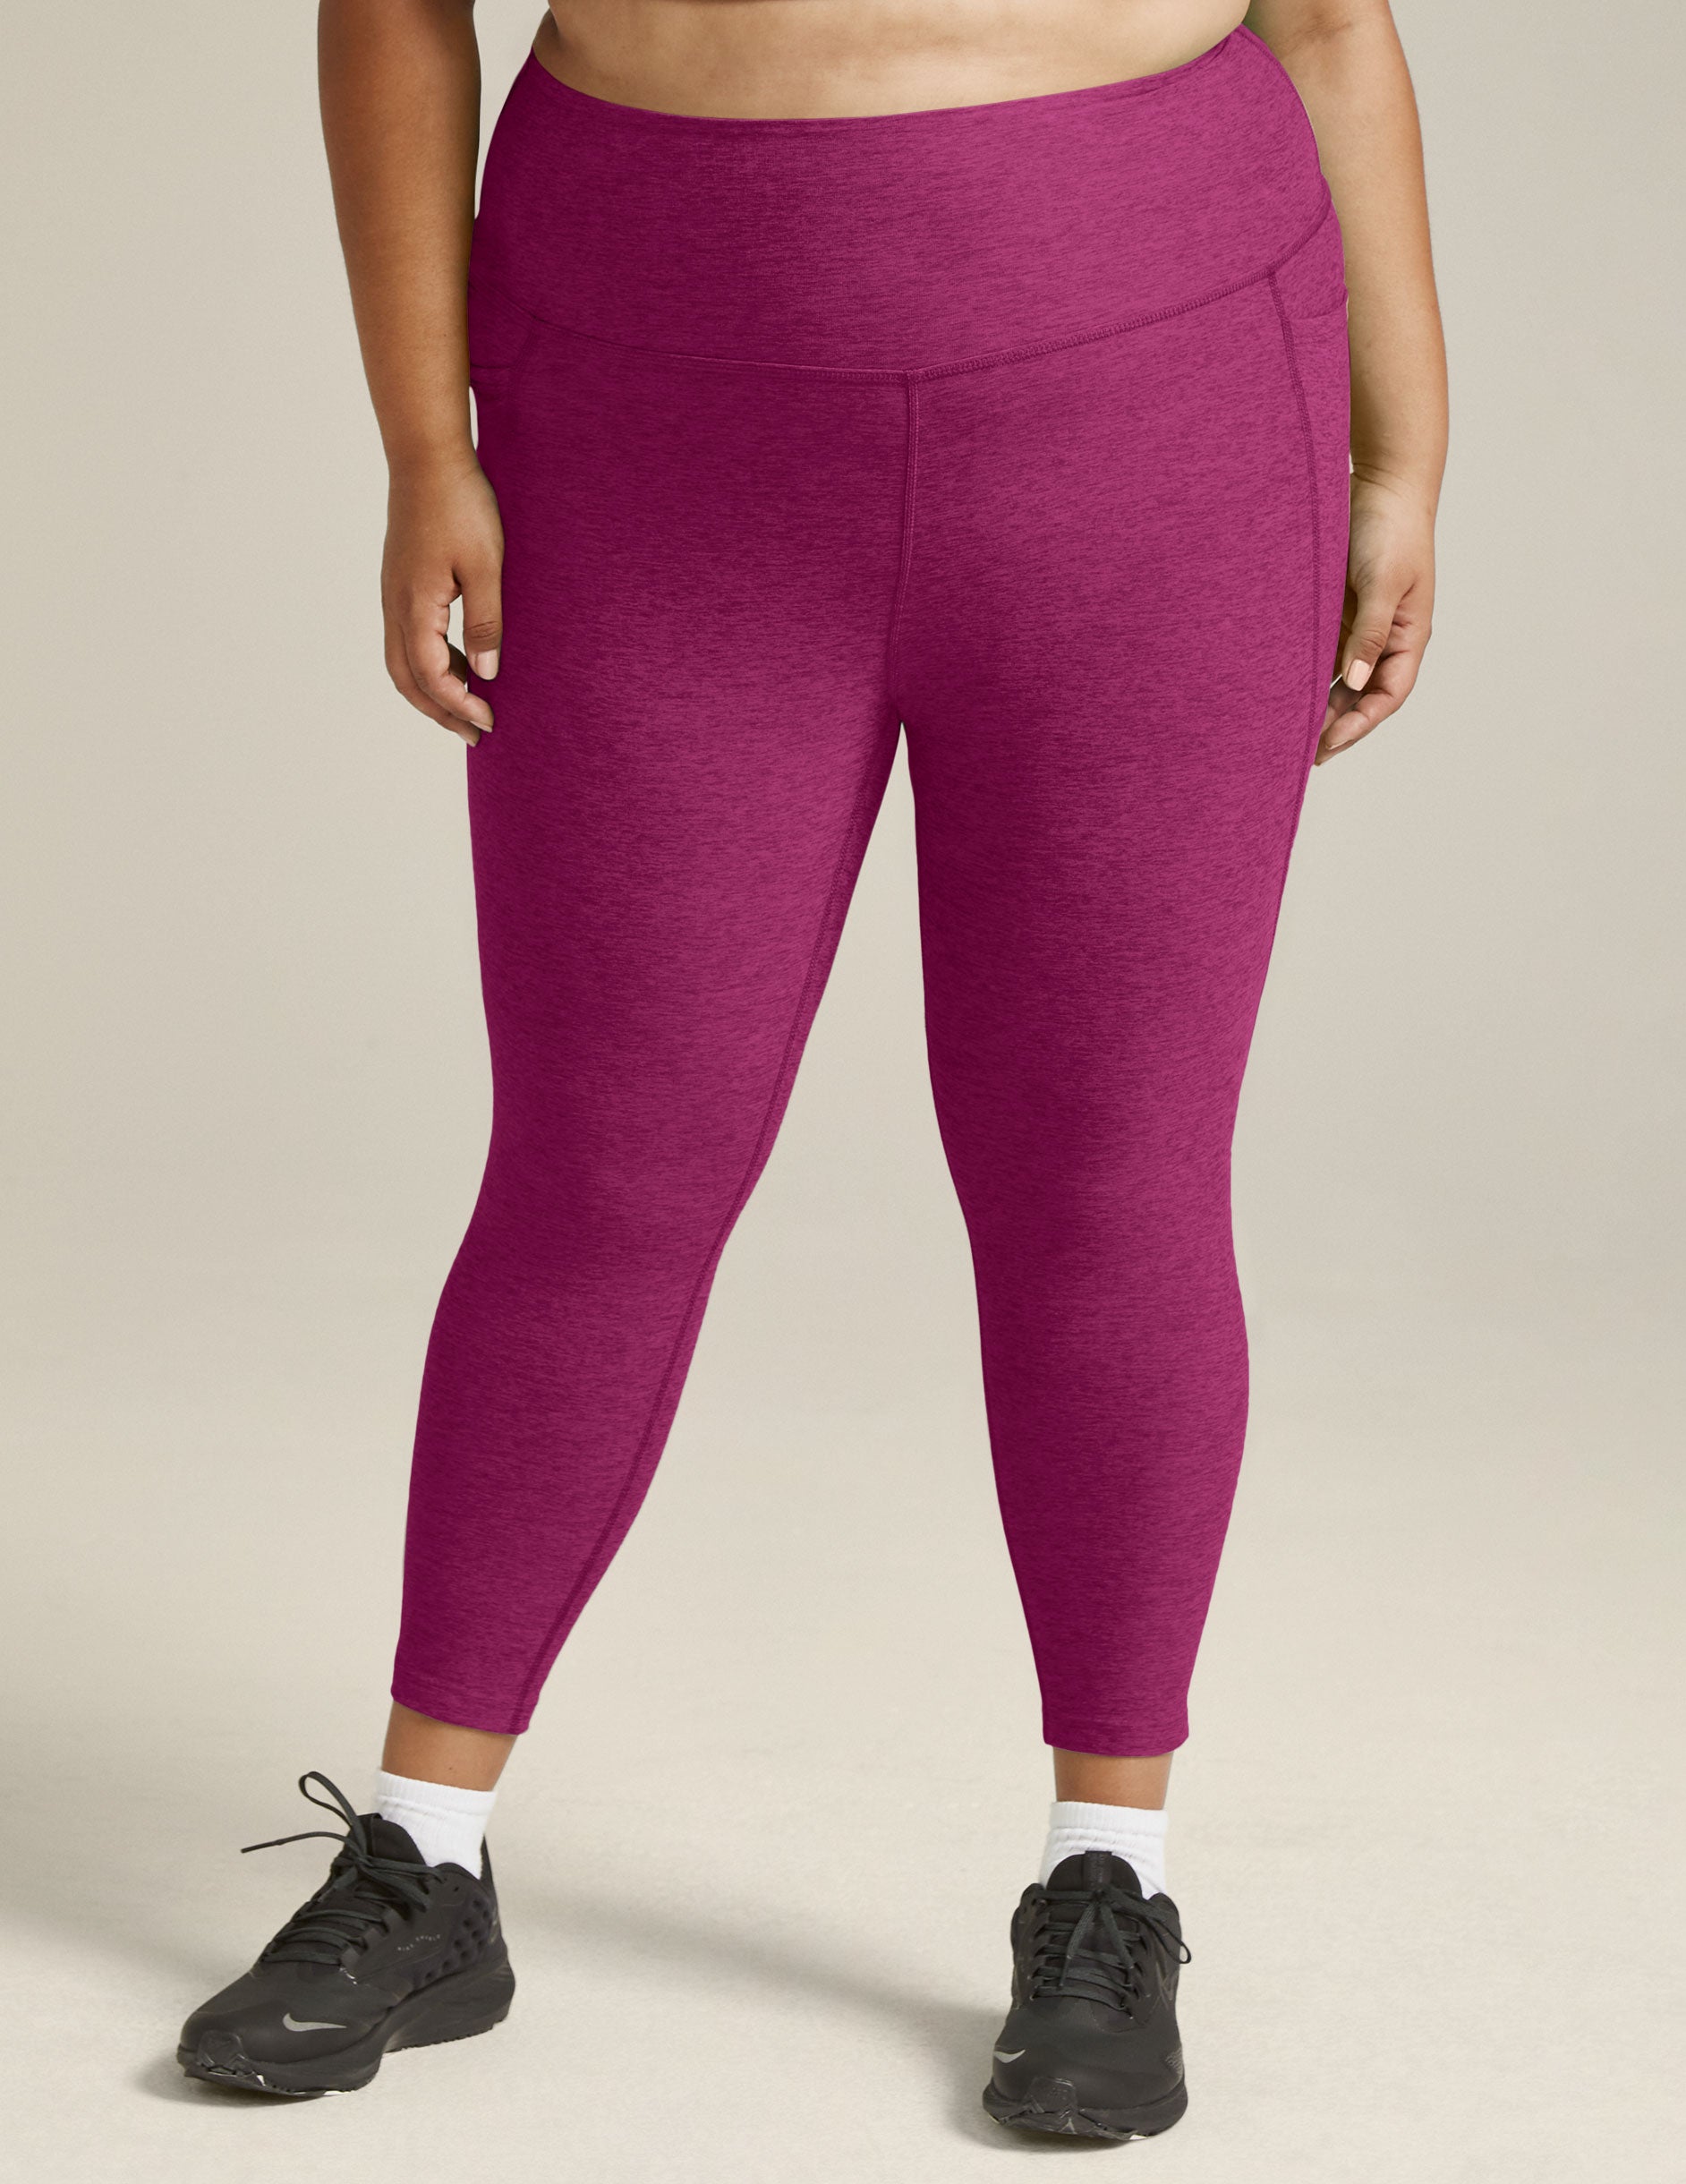 Spacedye Out Of Pocket High Waisted Midi Legging in Magenta Heather